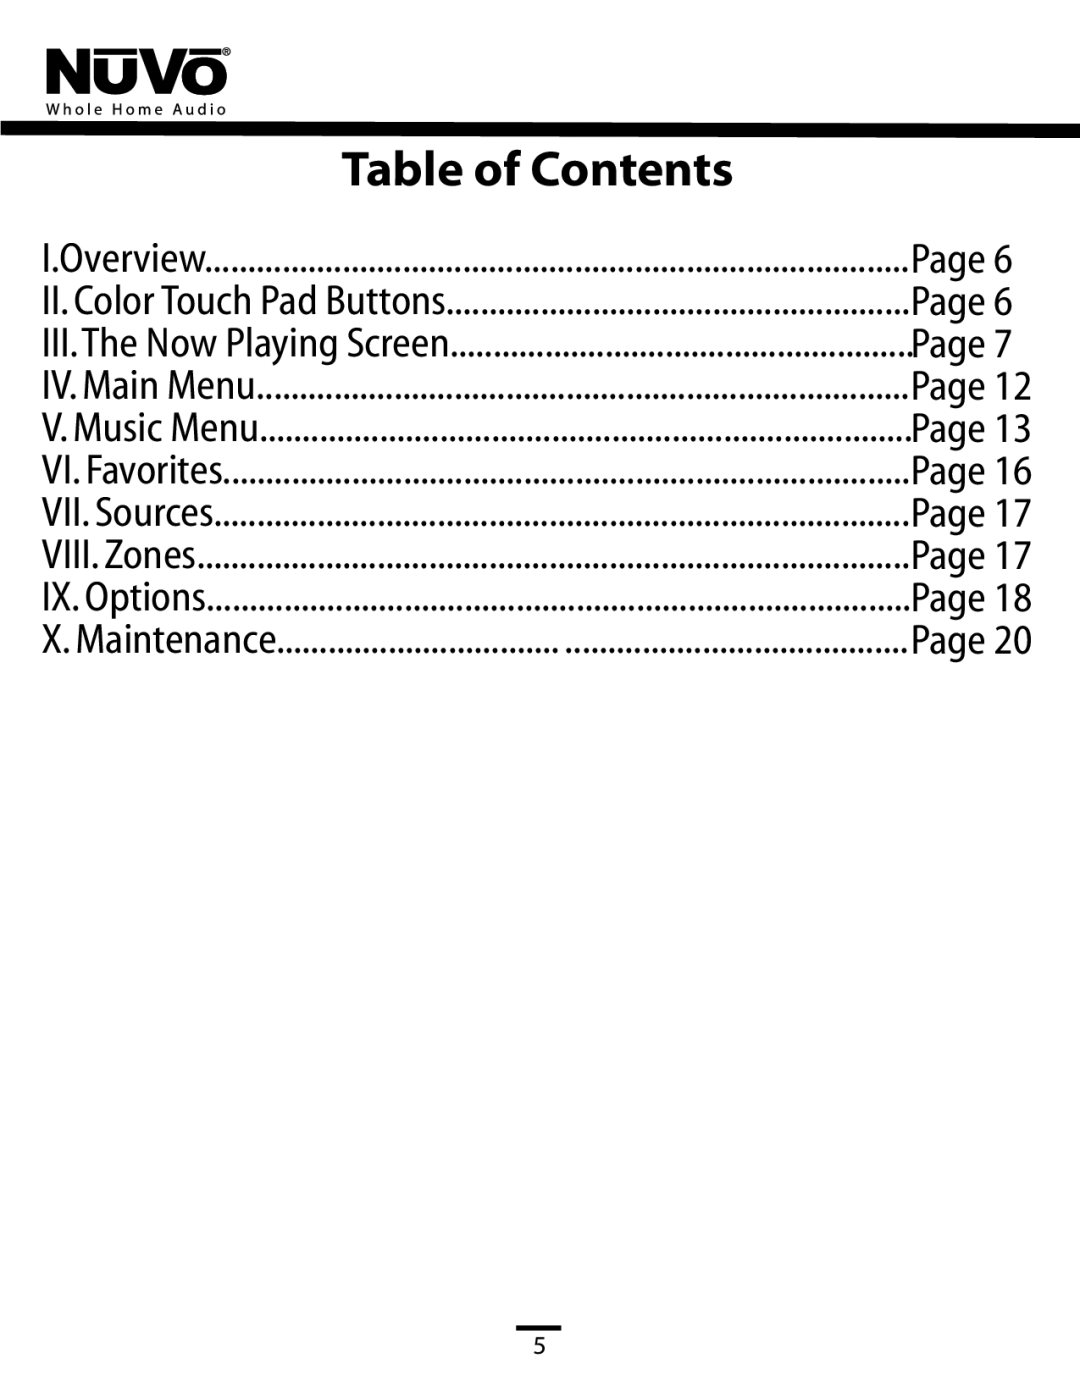 Nuvo NV-CTP36 manual Table of Contents, Page 